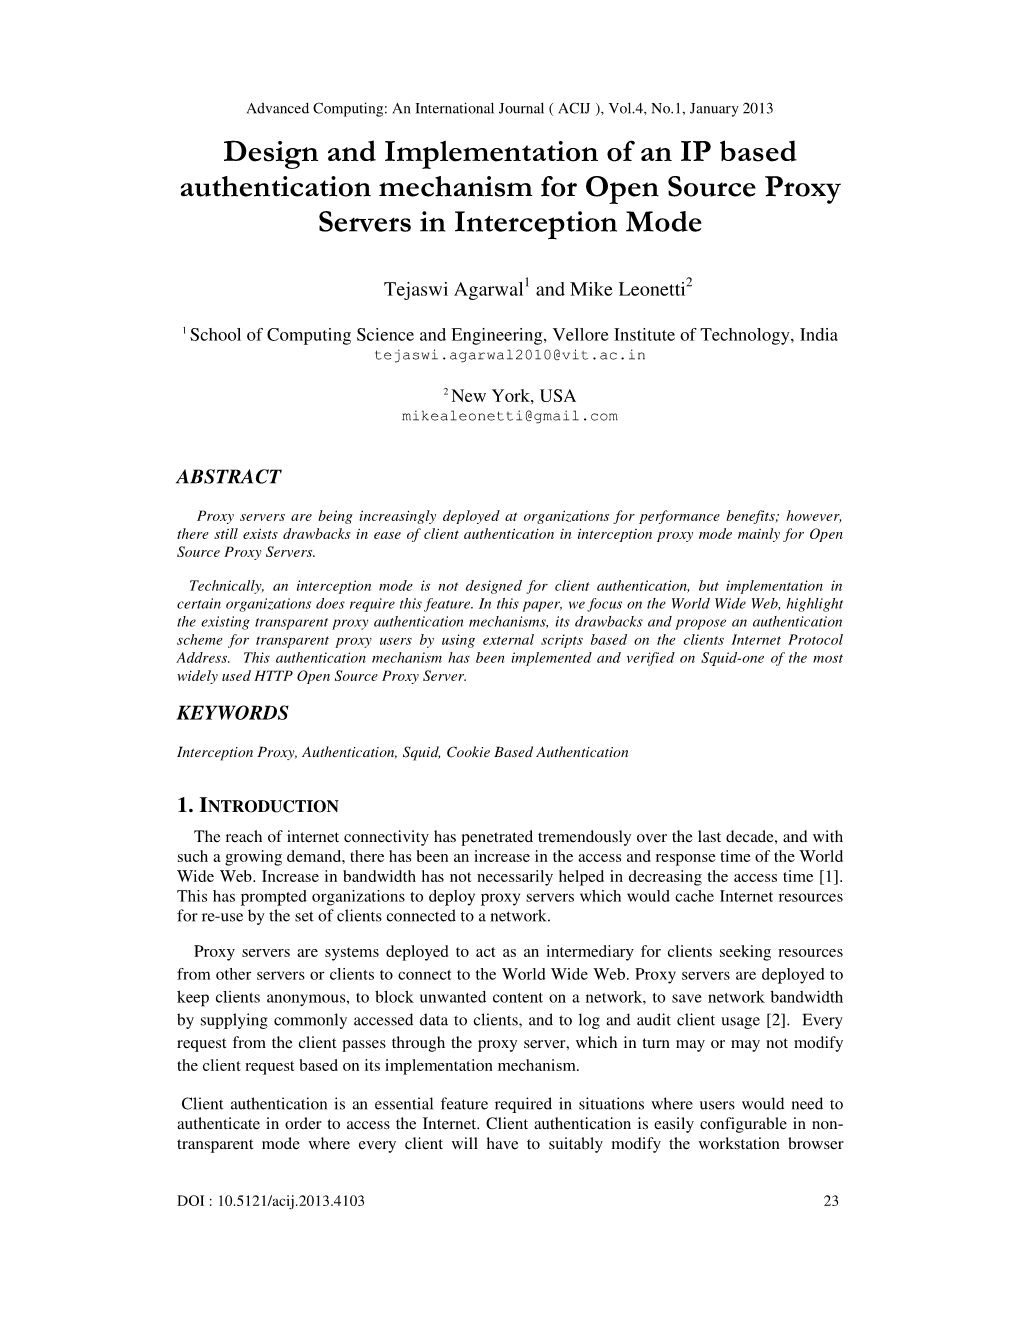 Design and Implementation of an IP Based Authentication Mechanism for Open Source Proxy Servers in Interception Mode